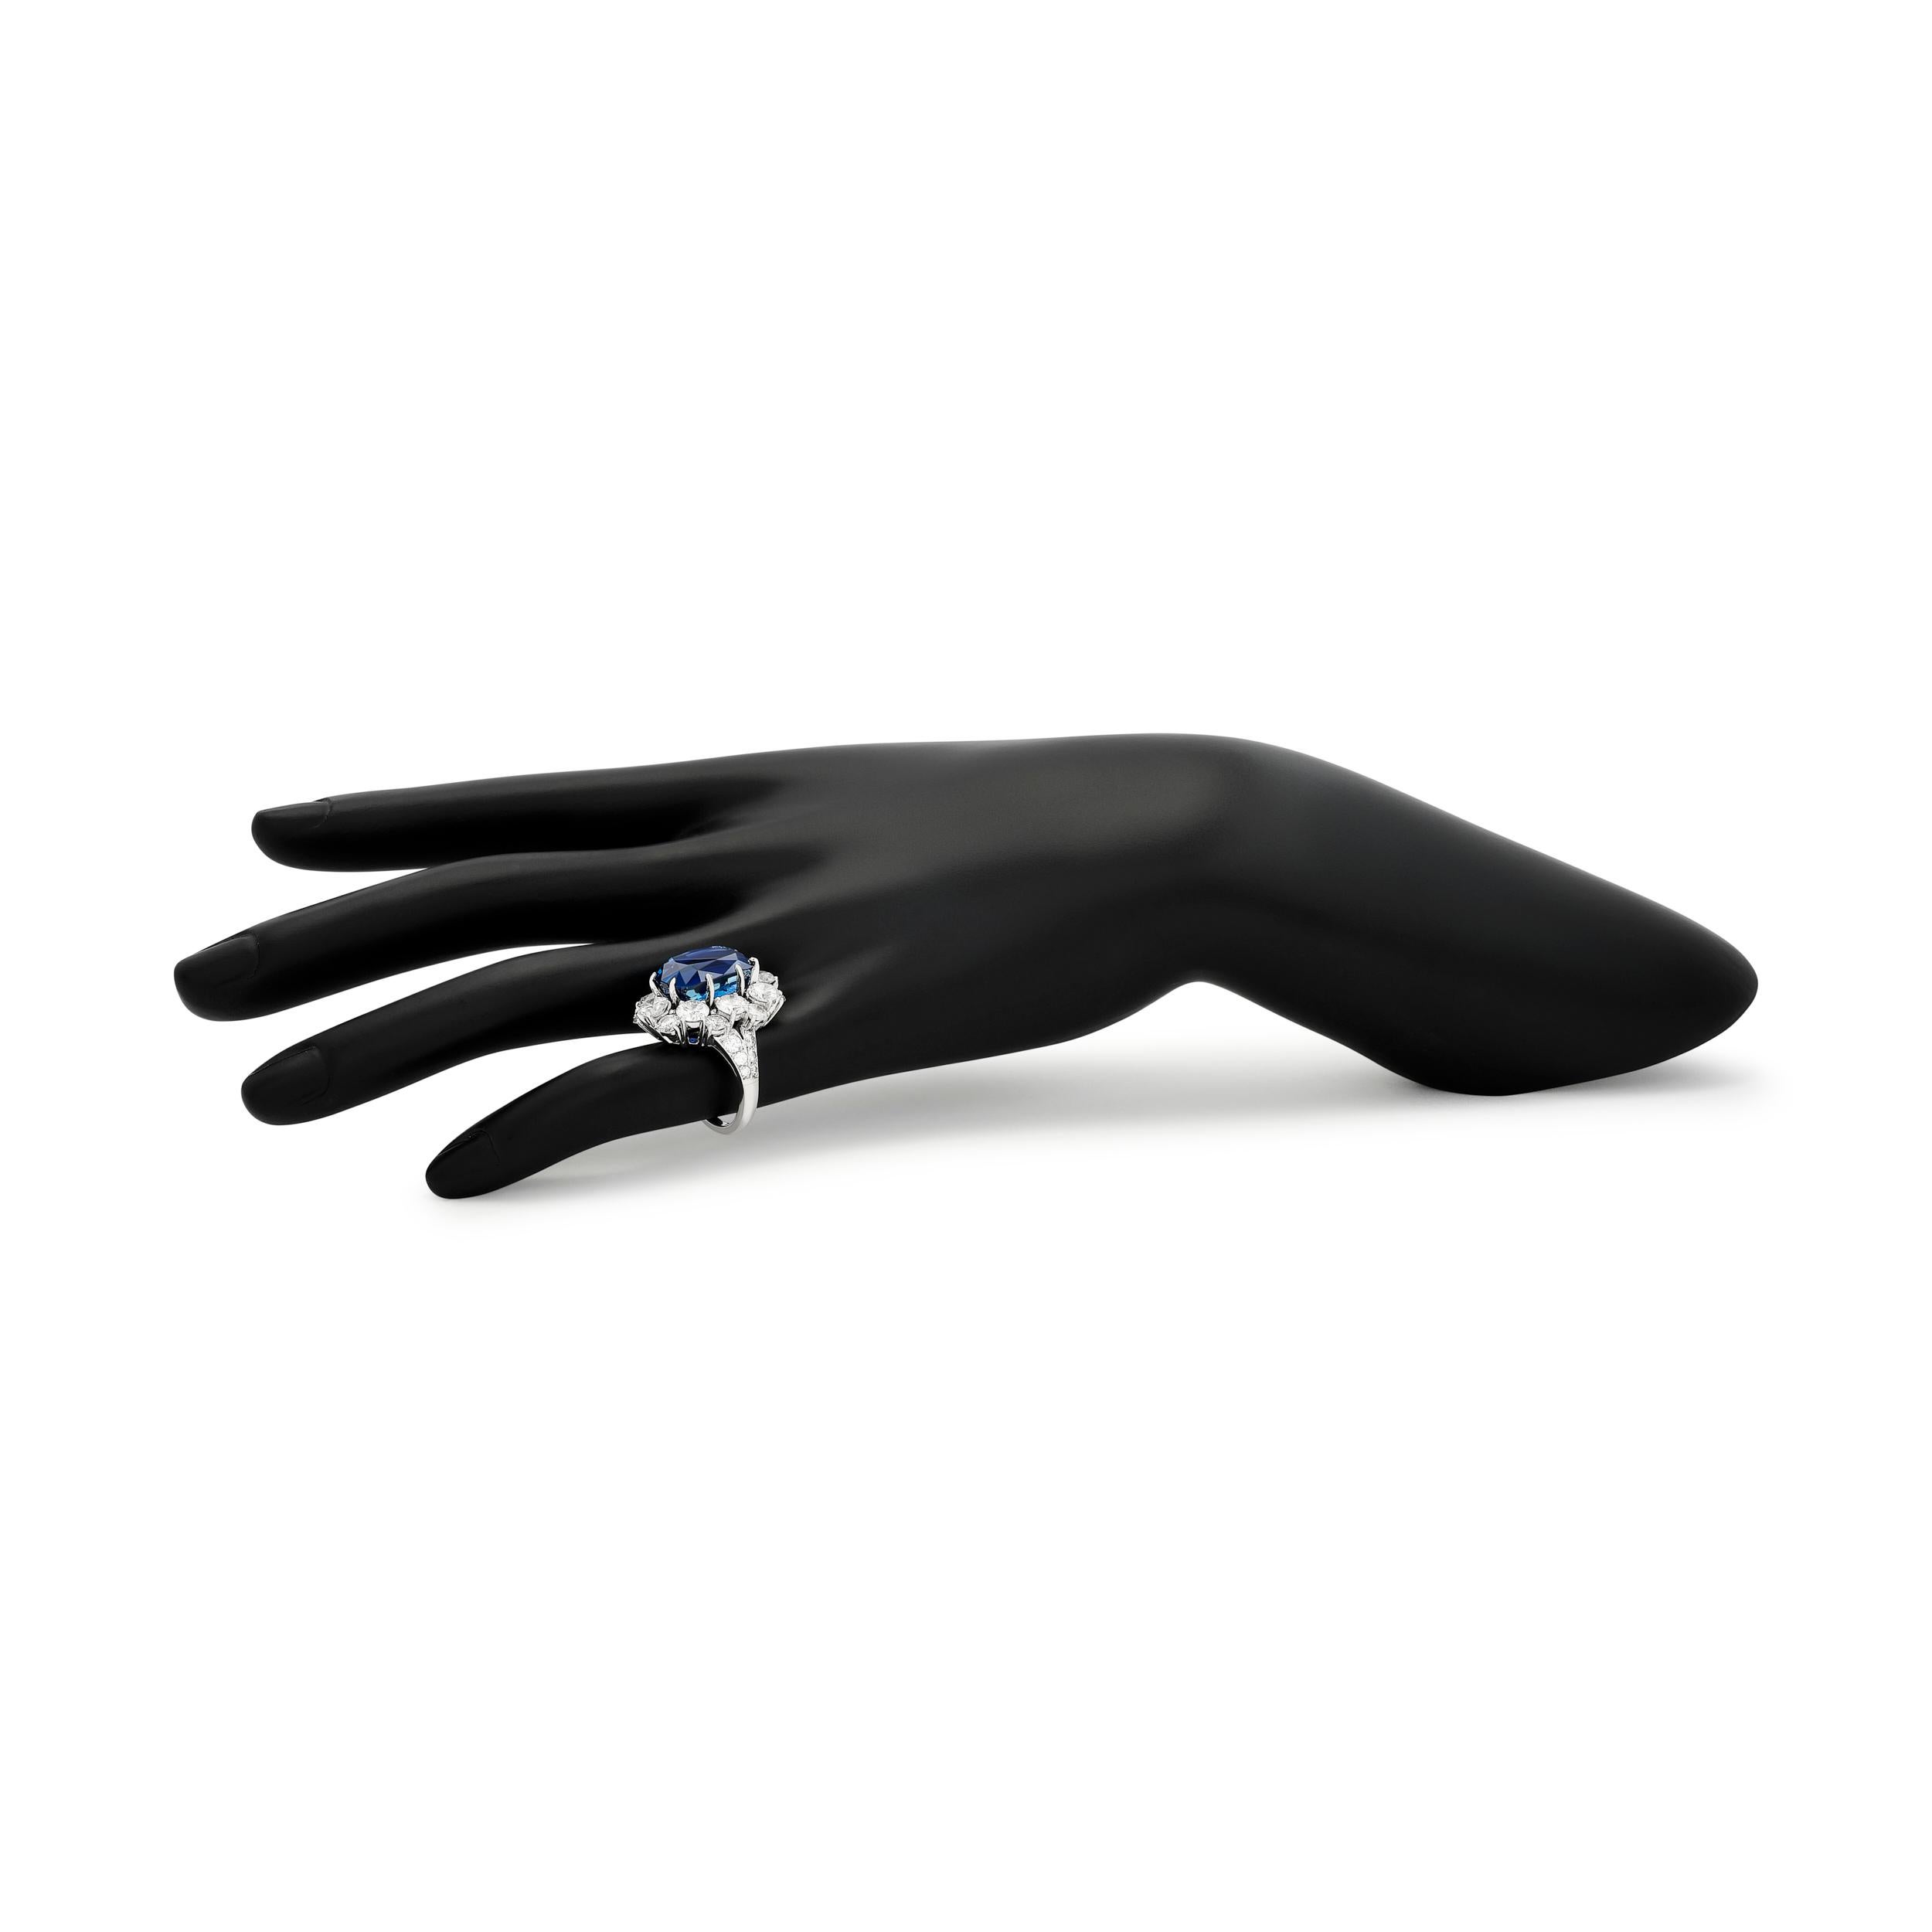 Van Cleef & Arpels Cushion Sapphire and Diamond Halo Ring in Platinum In Excellent Condition For Sale In Philadelphia, PA